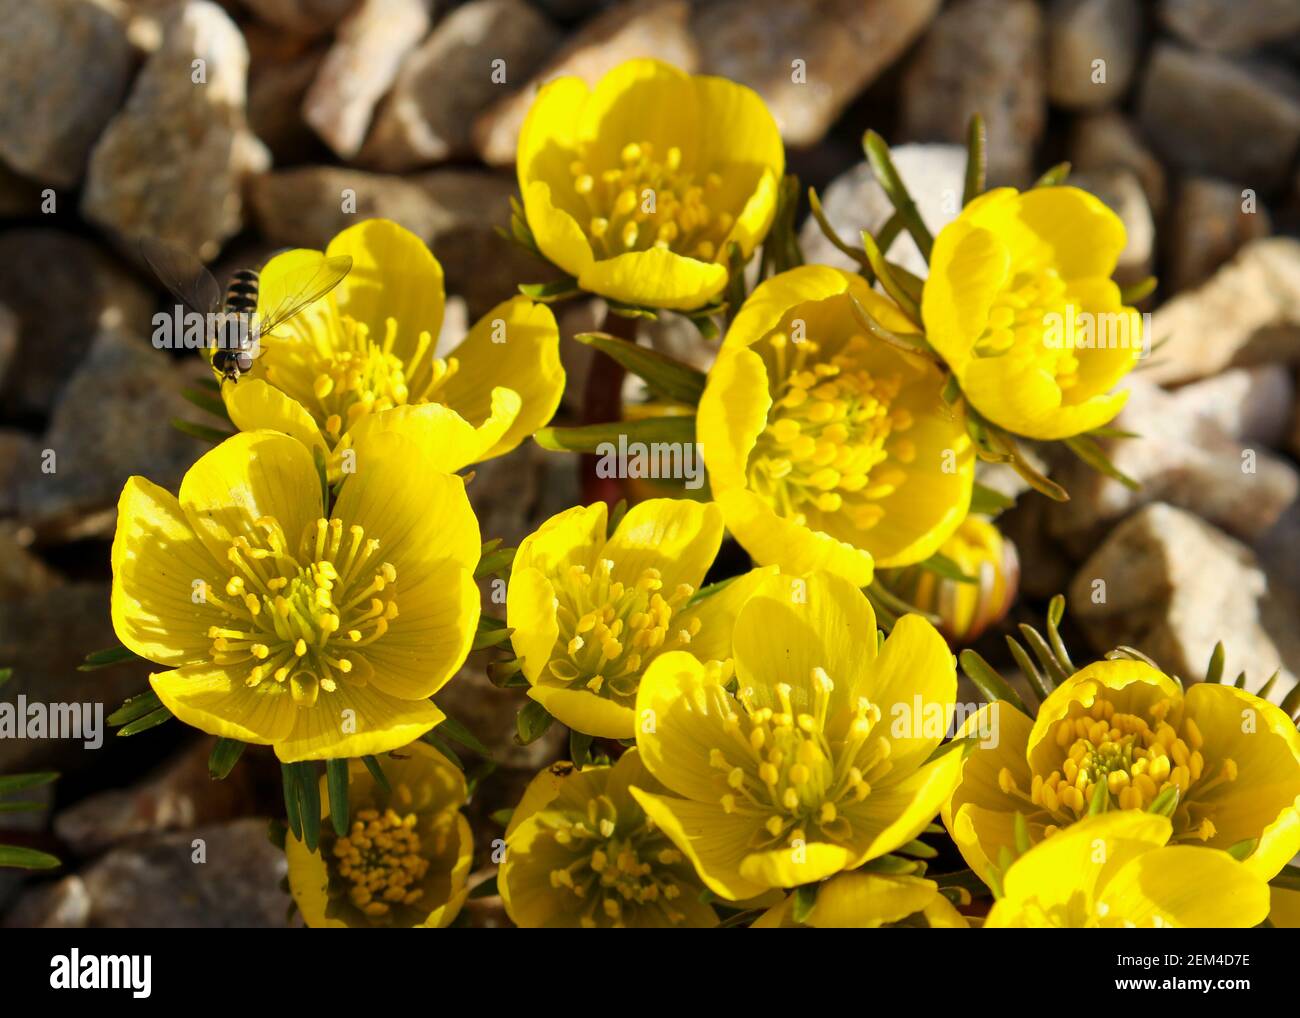 Eranthis cilicica yellow flower with honey bee insect on petal. Also 'winter aconite' family Ranunculaceae or buttercup. Blooming in Spring. Ireland Stock Photo